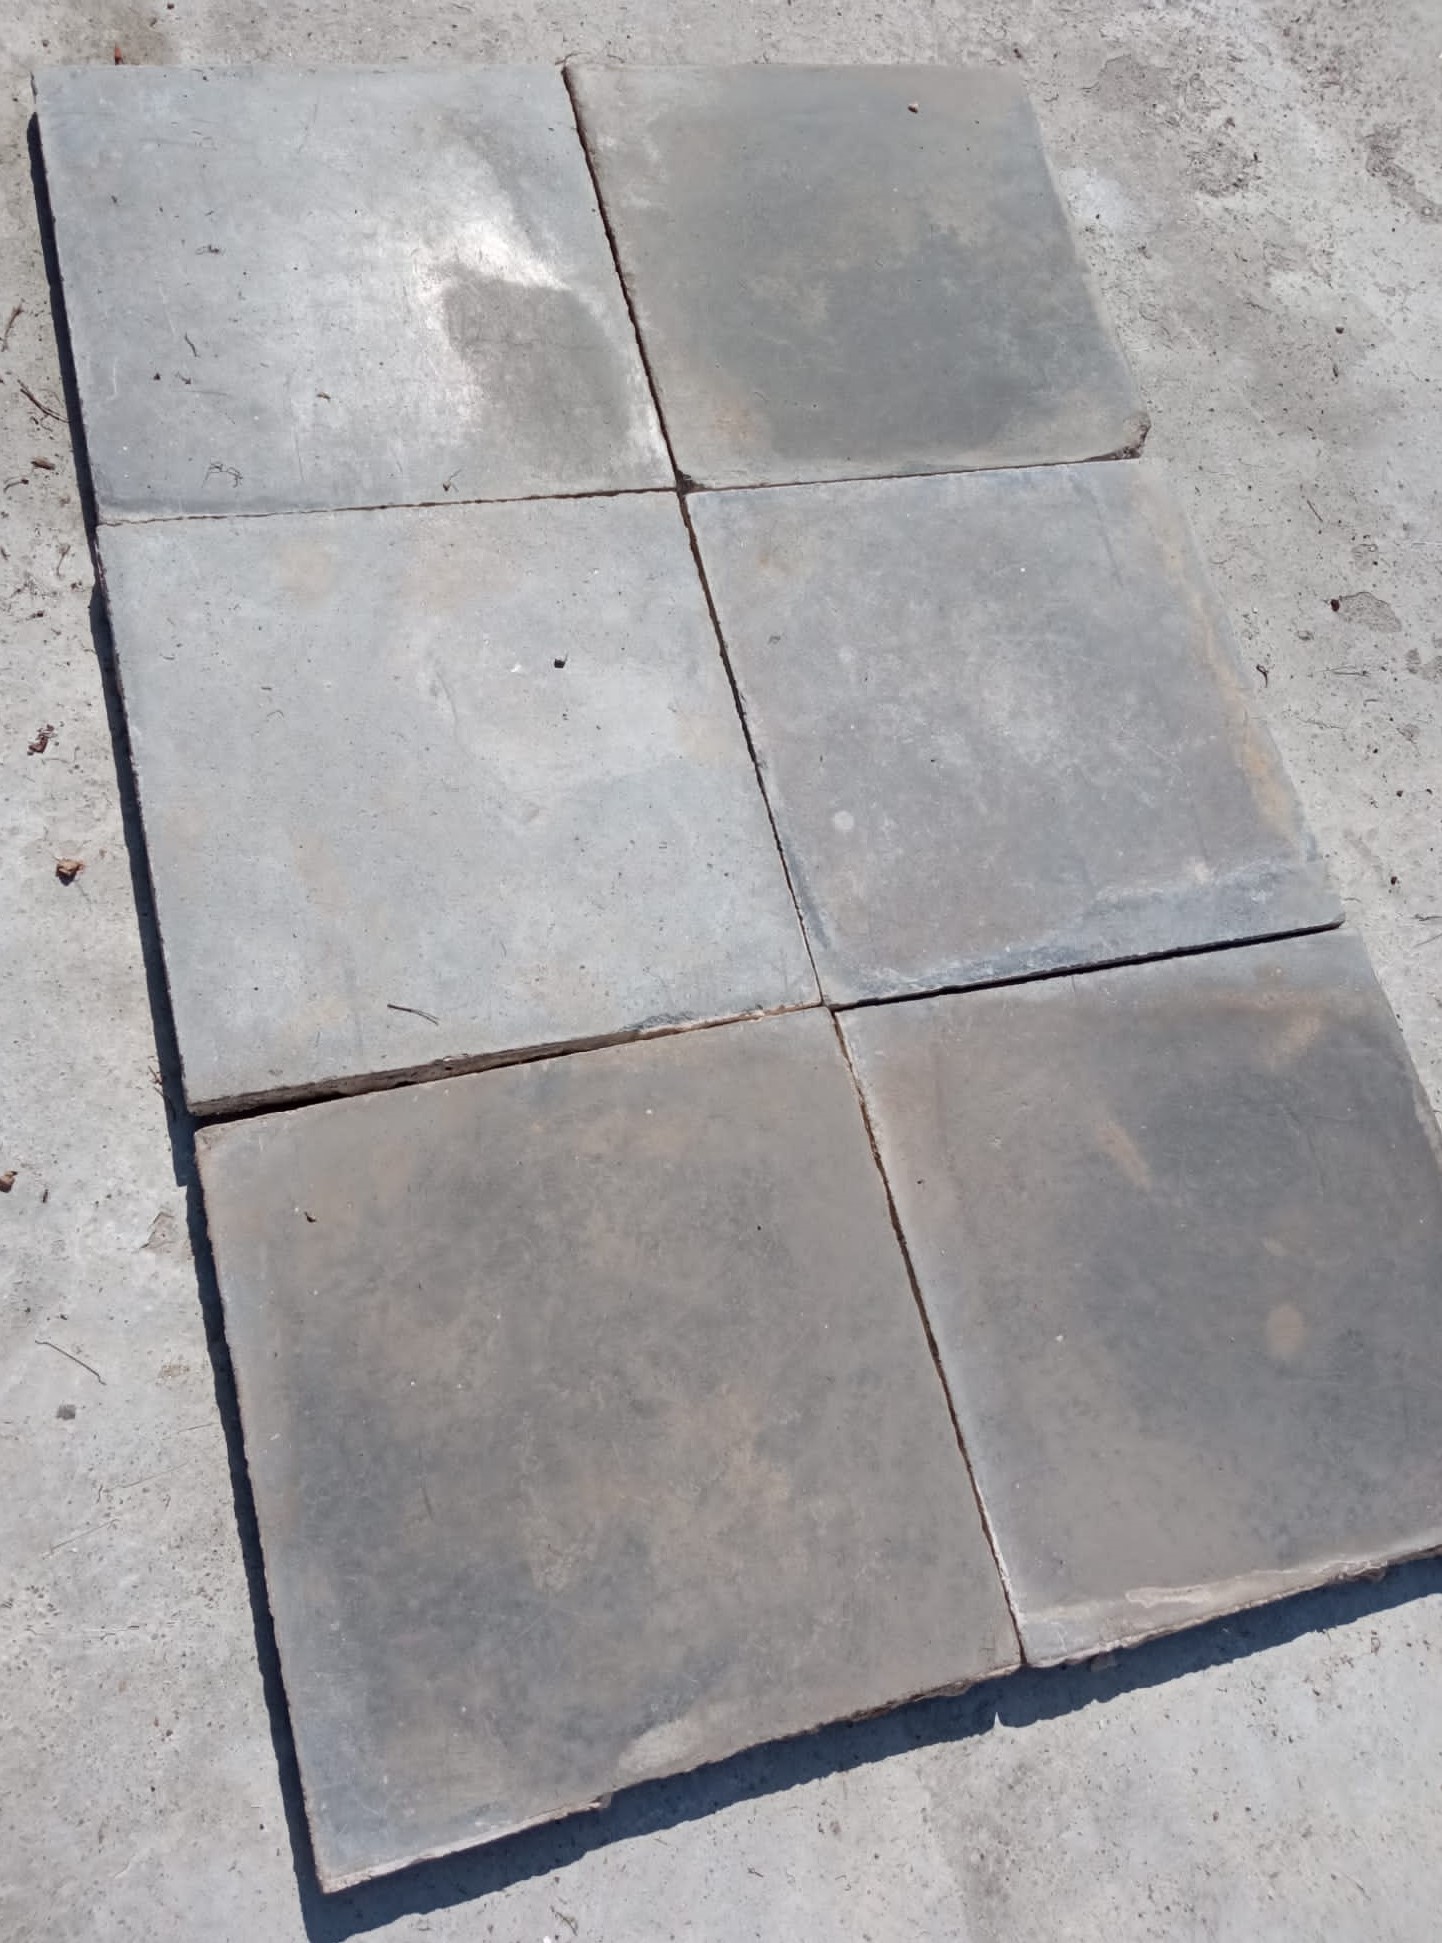 DARP211 - Square black cement tiles, 1900s, number of 19 pcs. approx. 2 m2